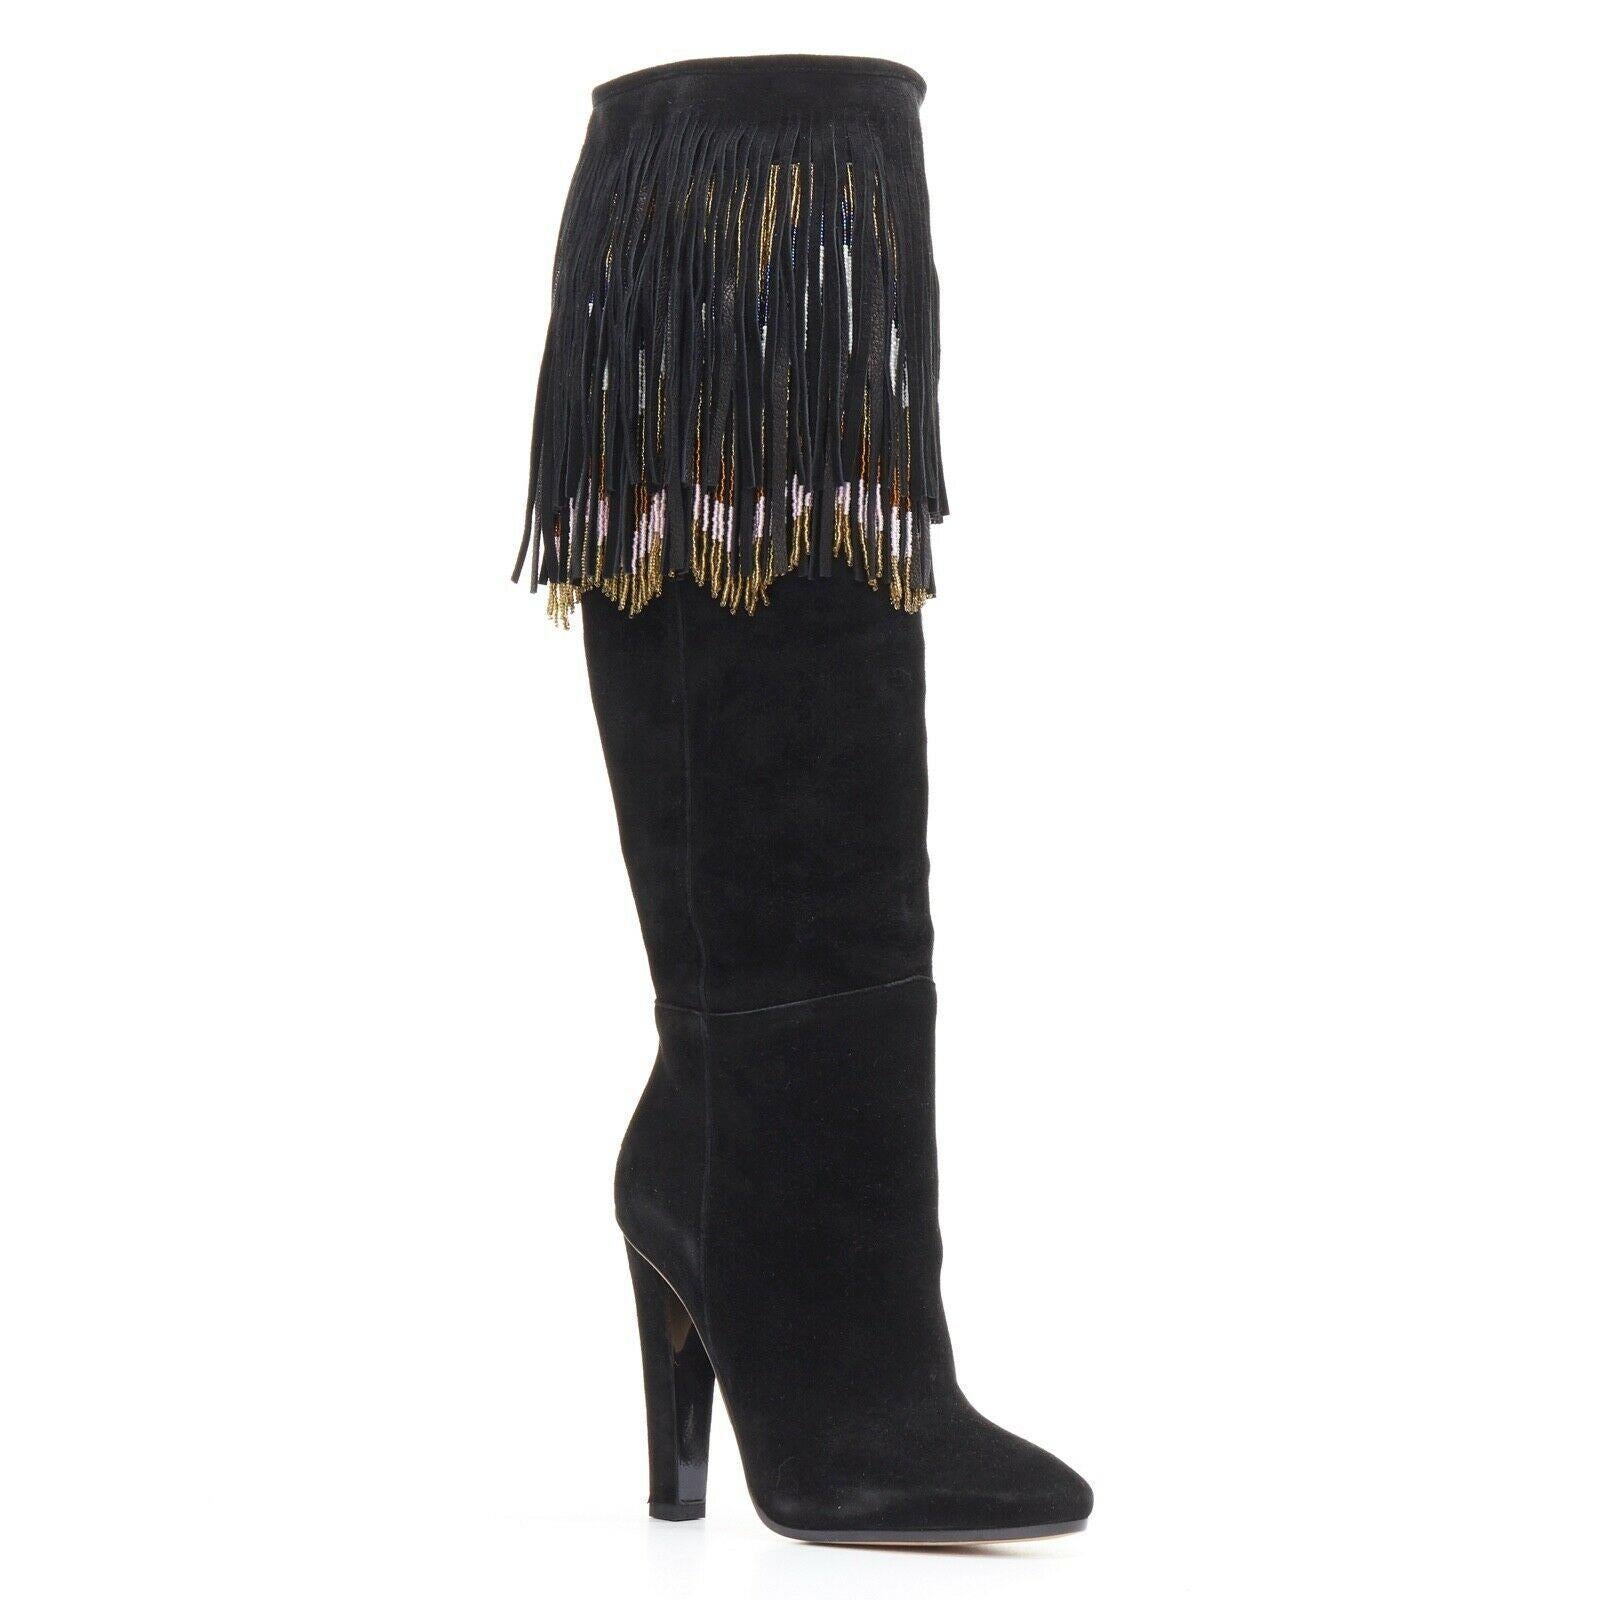 new JIMMY CHOO Bill black suede leather bohemian beaded fringe tall boots EU36.5

JIMMY CHOOBill boots. Black suede leather upper. Tonal stitching. Almond round toe. Angular high heel. Multi-color bohemian bead fringe trimming at opening. Pull on.